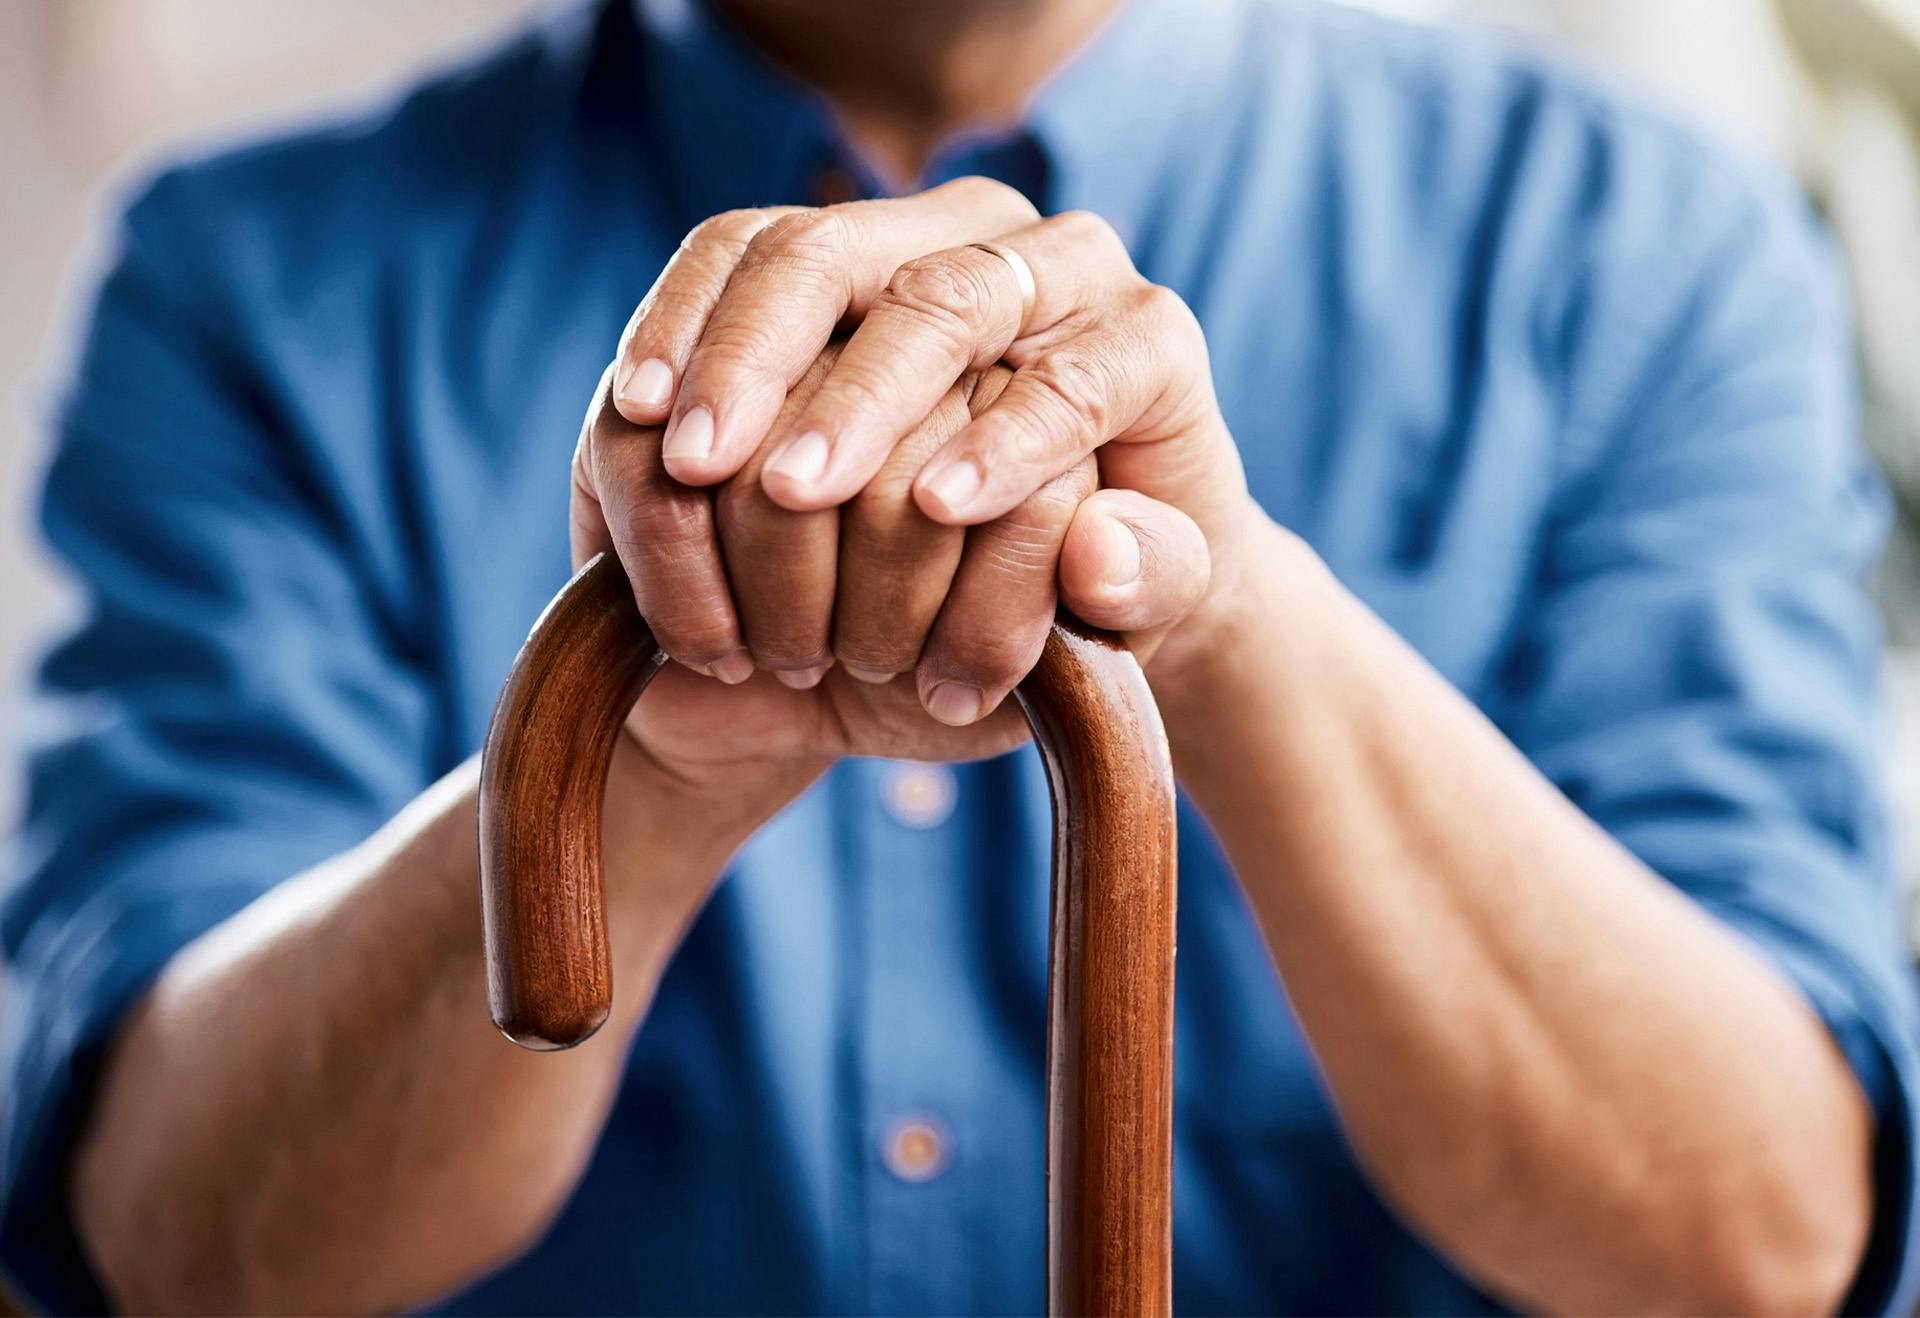 Man's hands resting on a cane.